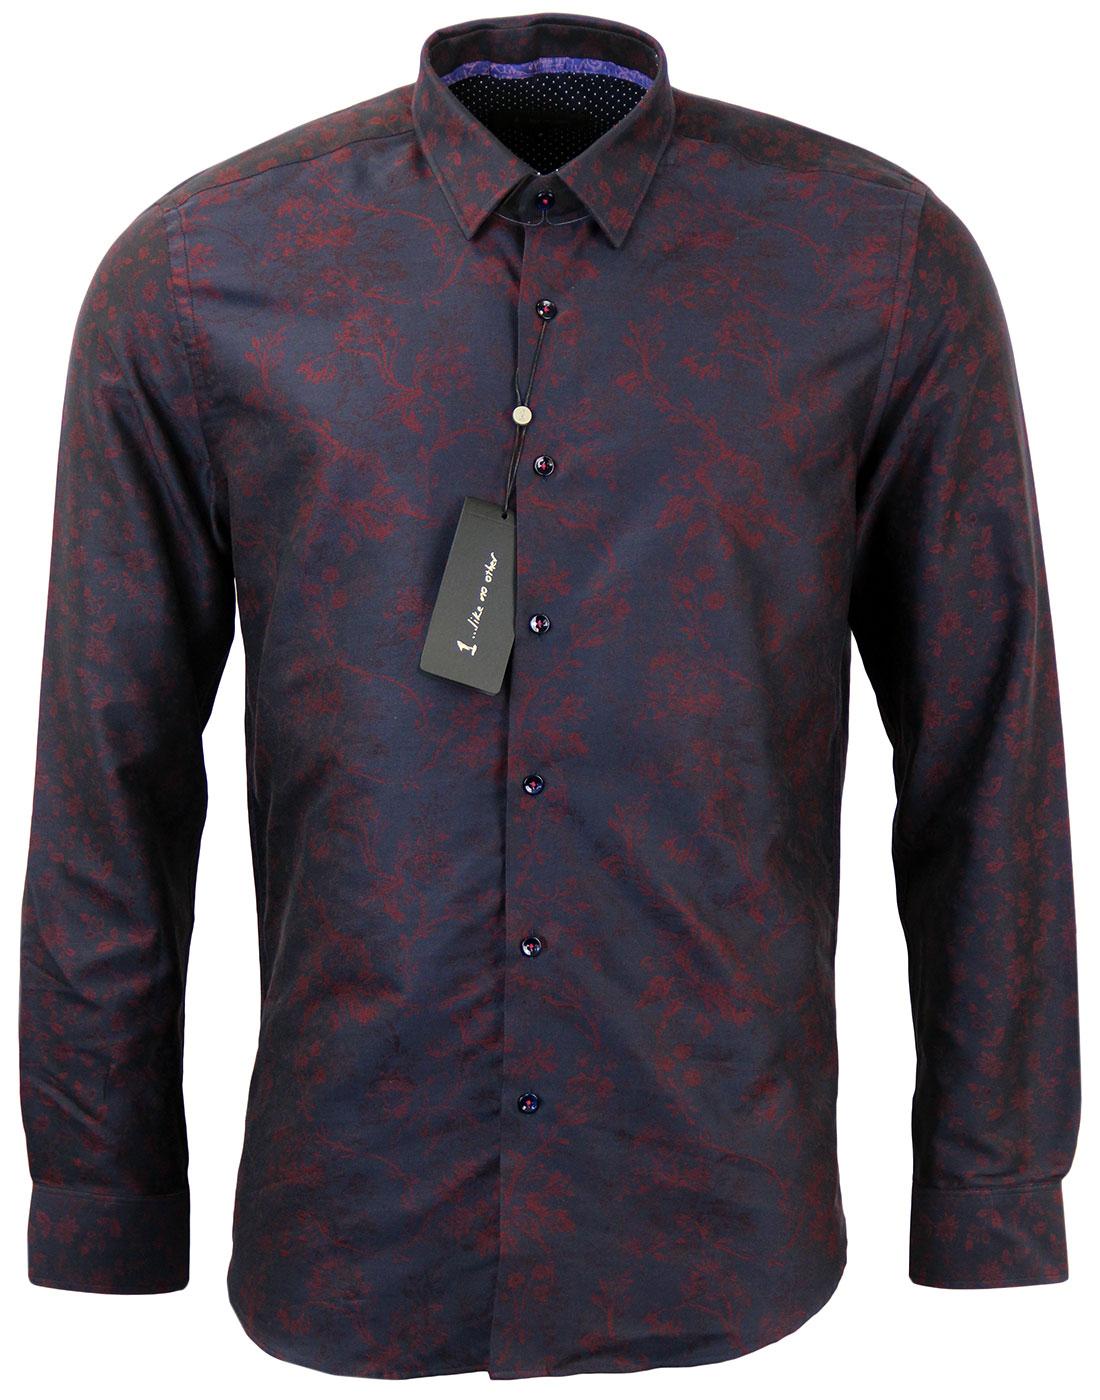 Current 1 LIKE NO OTHER Retro Floral Print Shirt